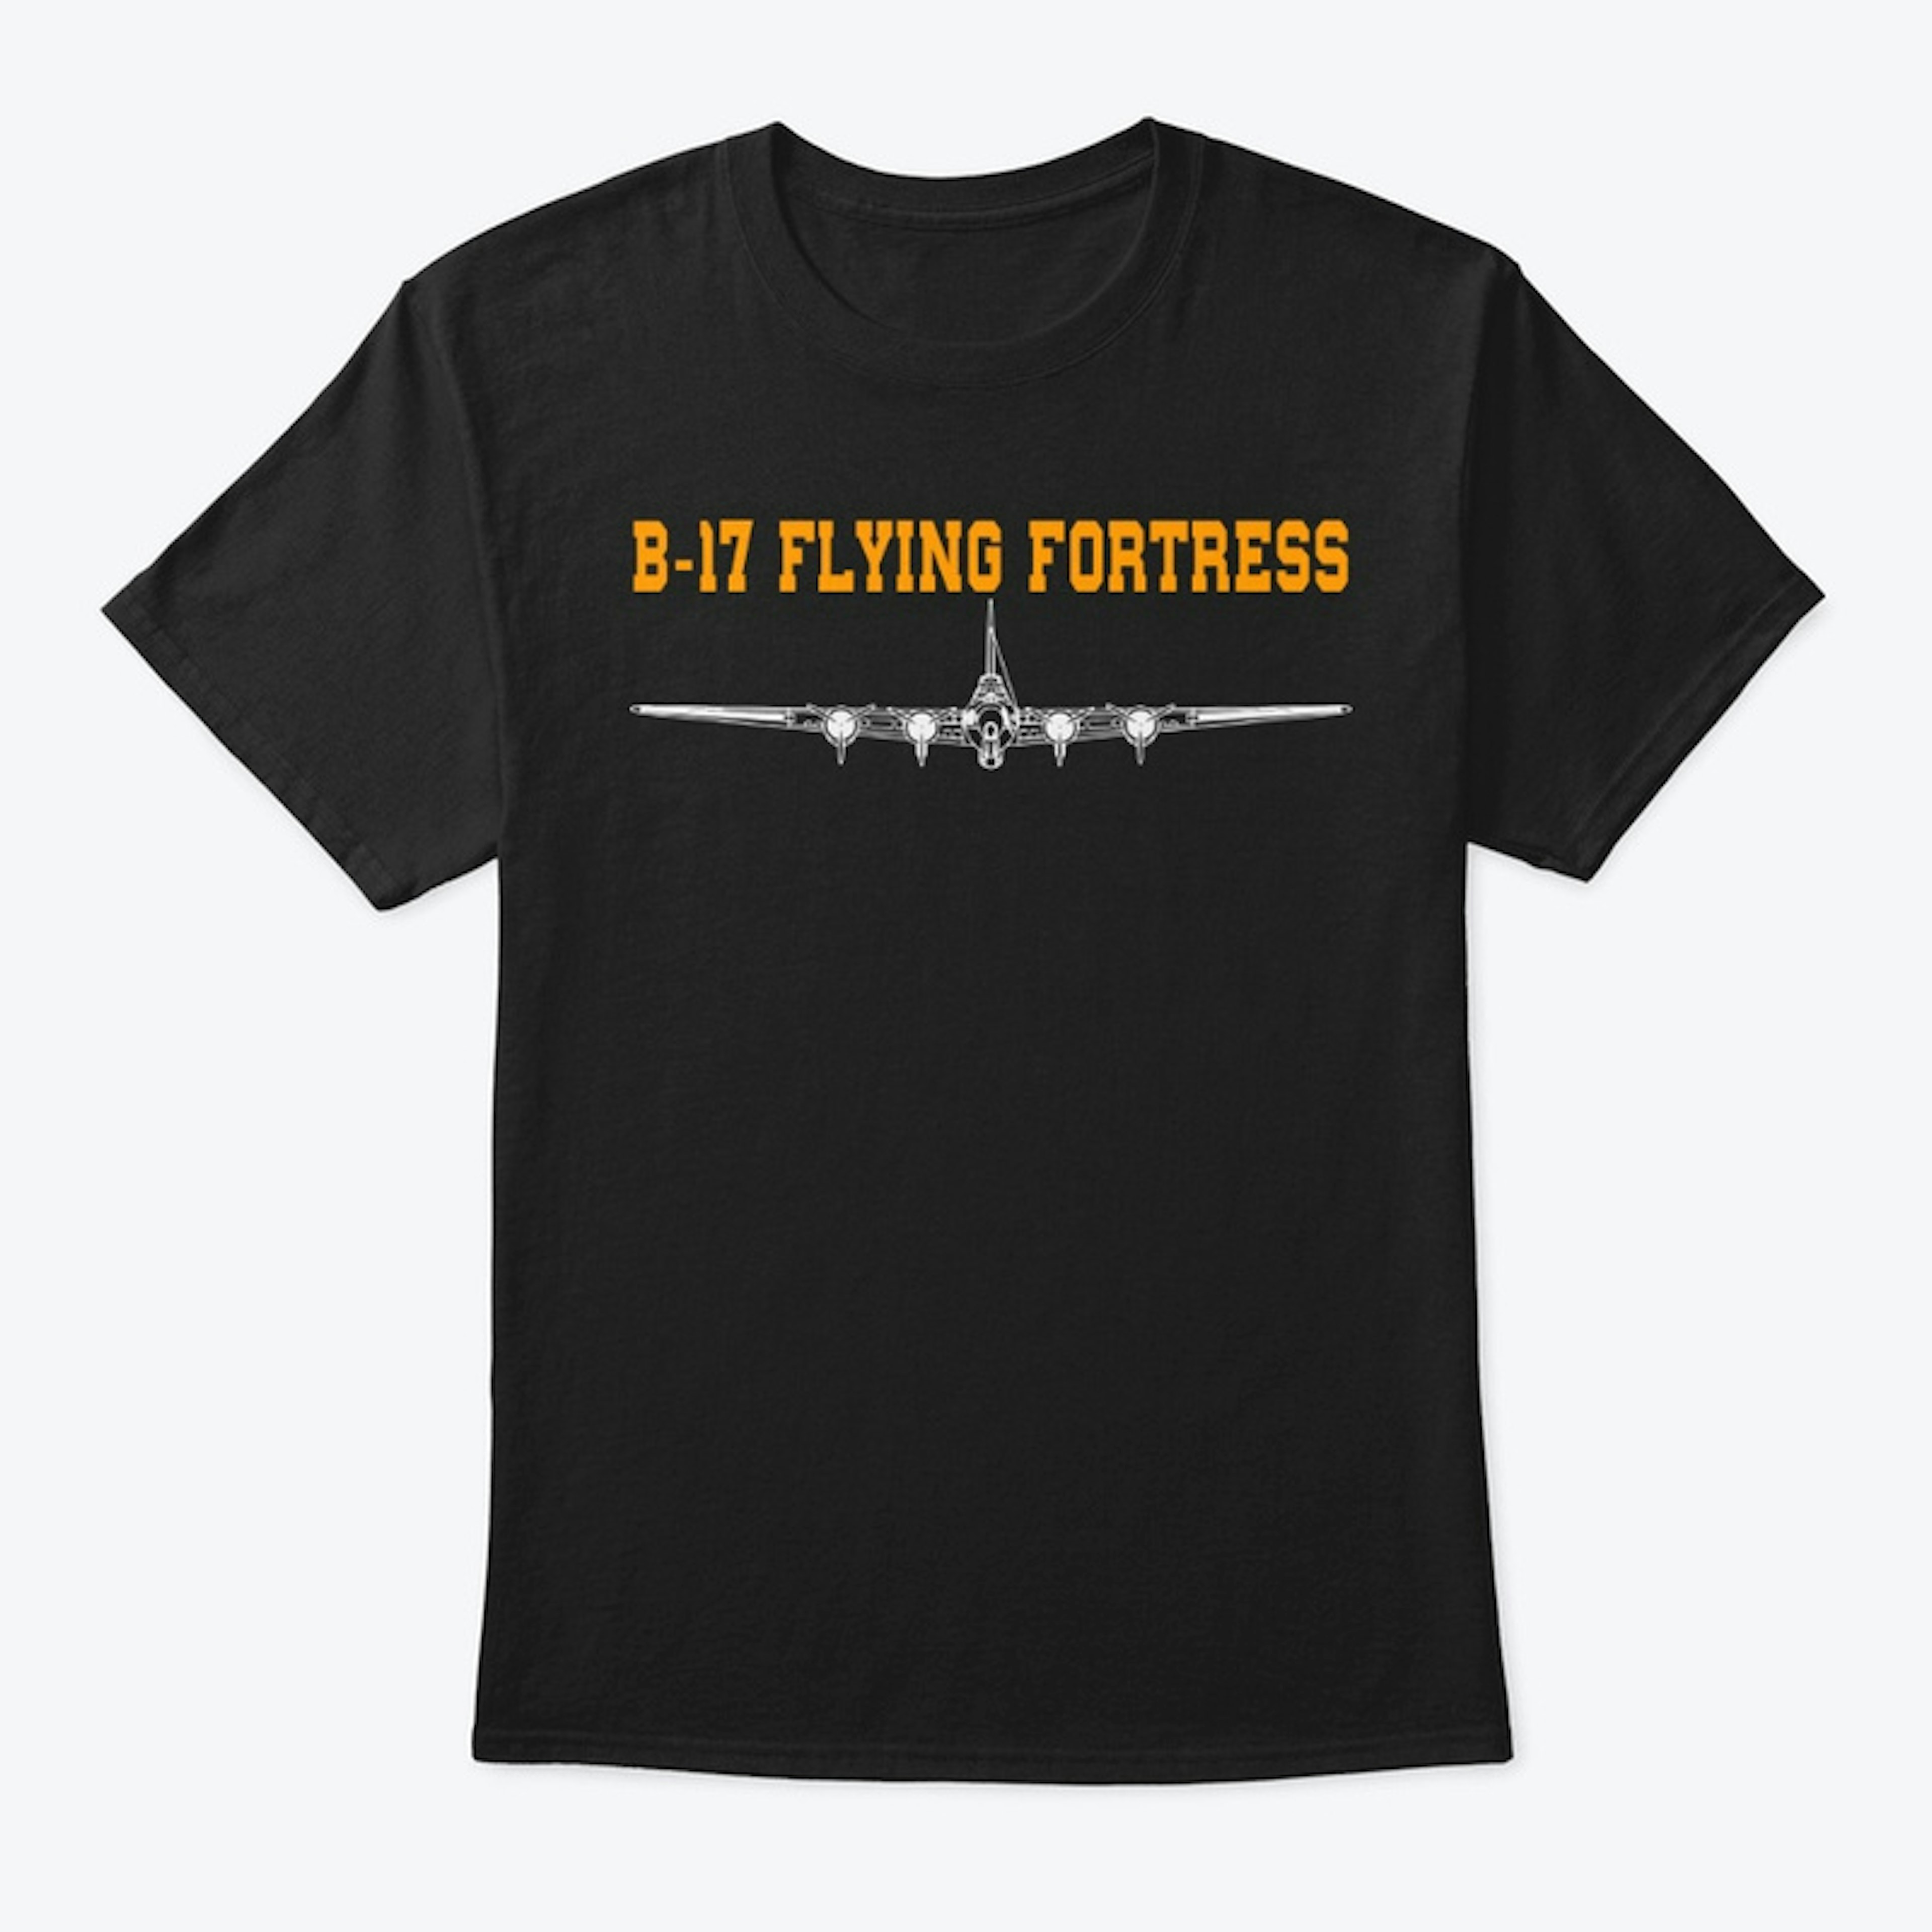 B-17 Flying Fortress - The Front